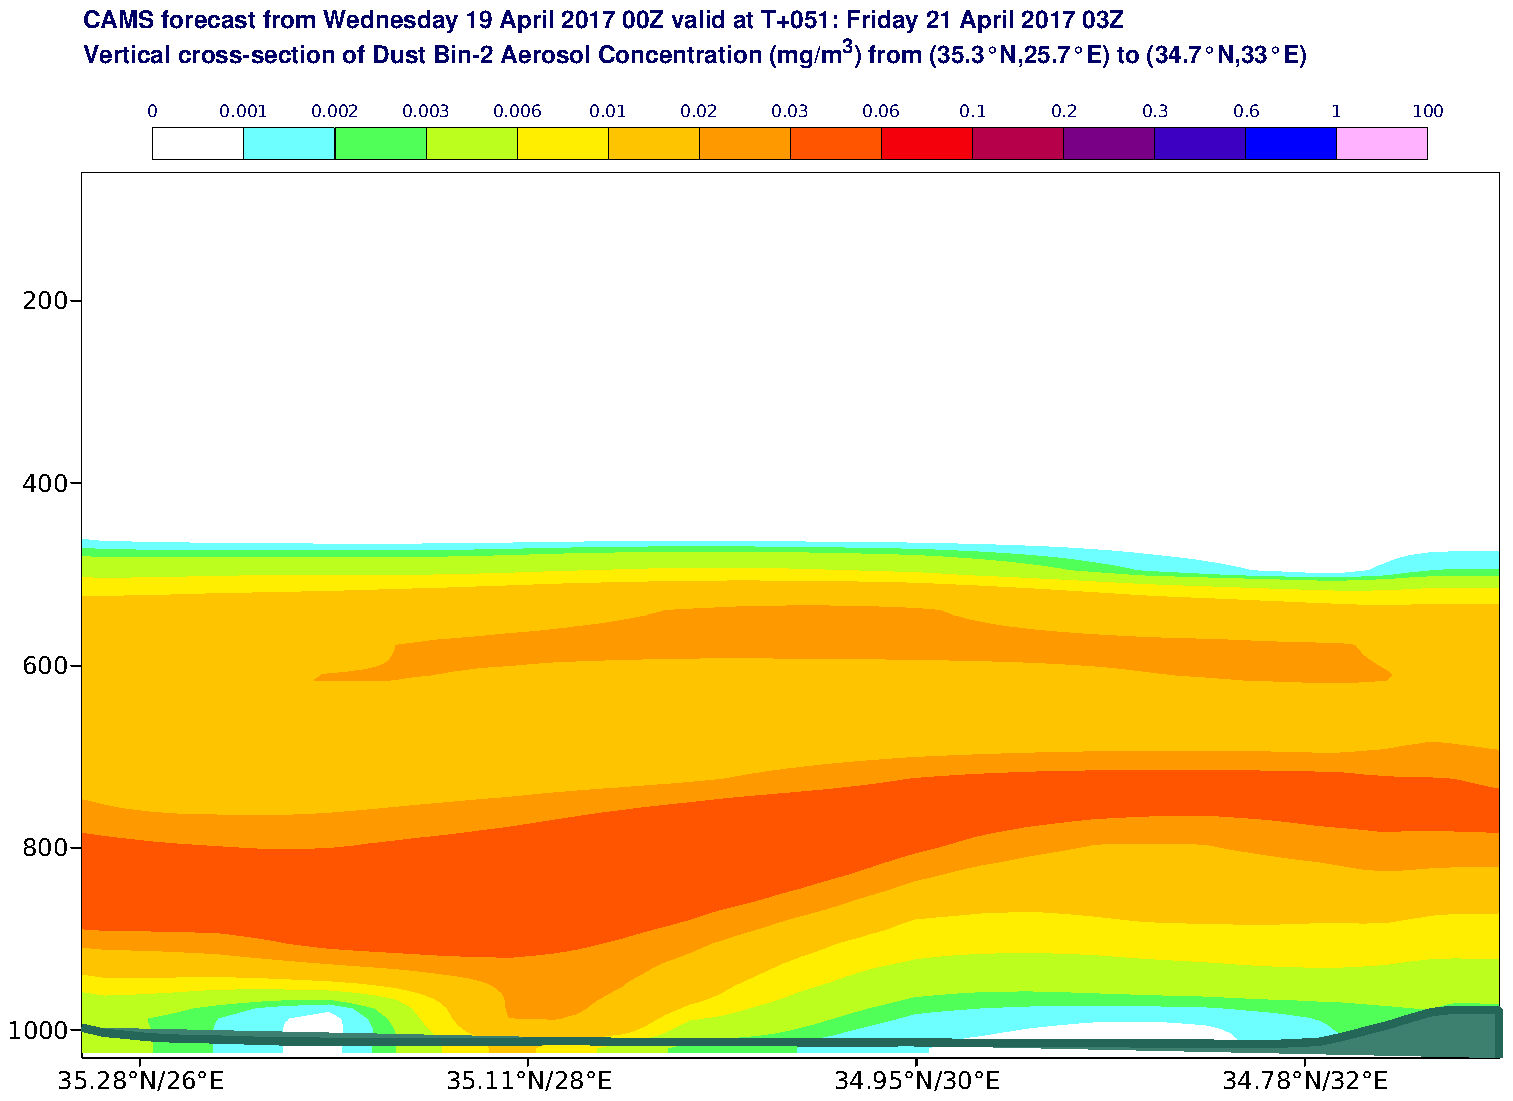 Vertical cross-section of Dust Bin-2 Aerosol Concentration (mg/m3) valid at T51 - 2017-04-21 03:00